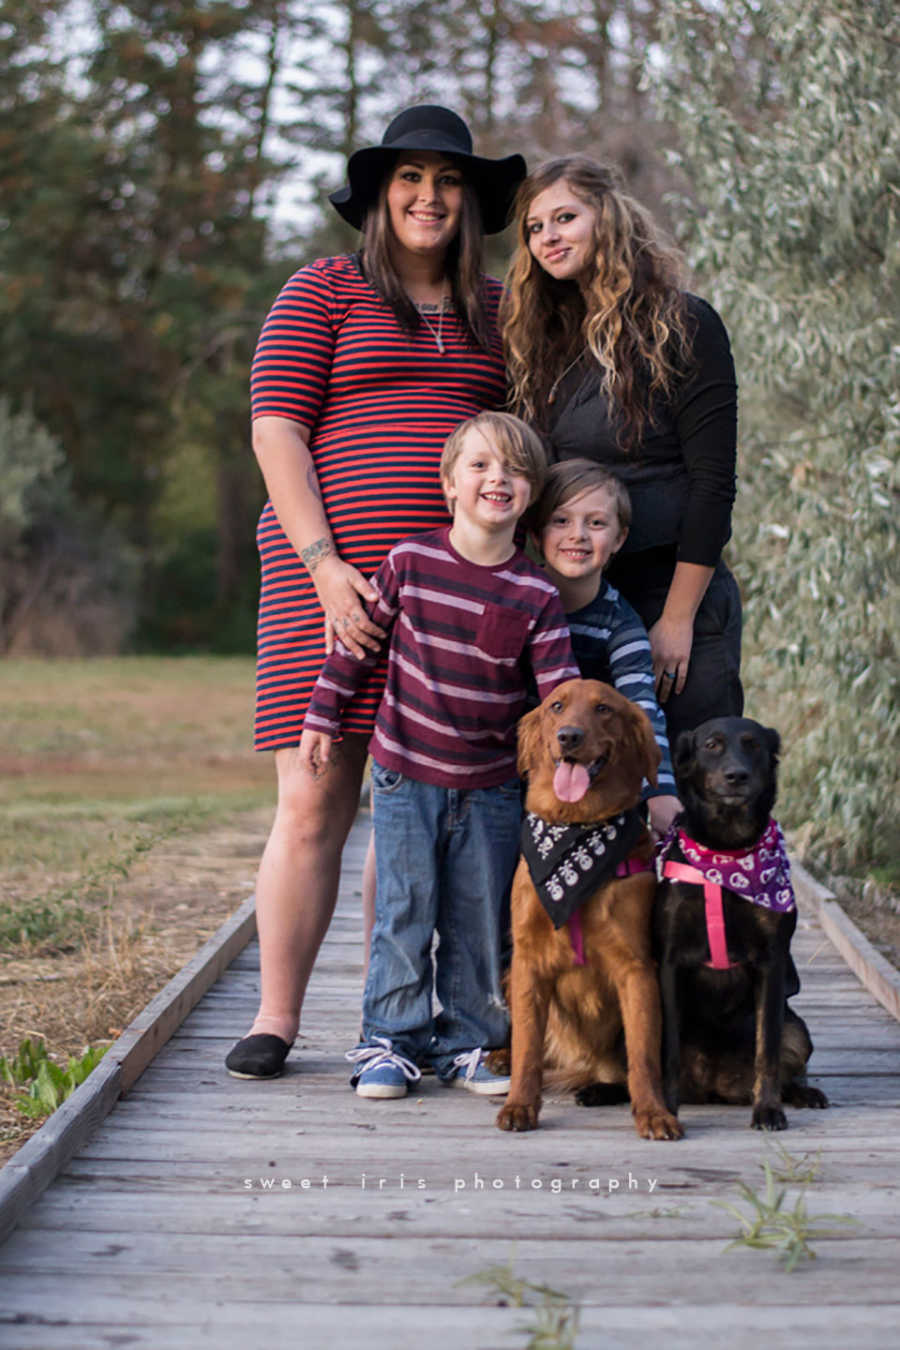 Same sex fiancee's stand smiling behind one of the woman's twin boys and two dogs